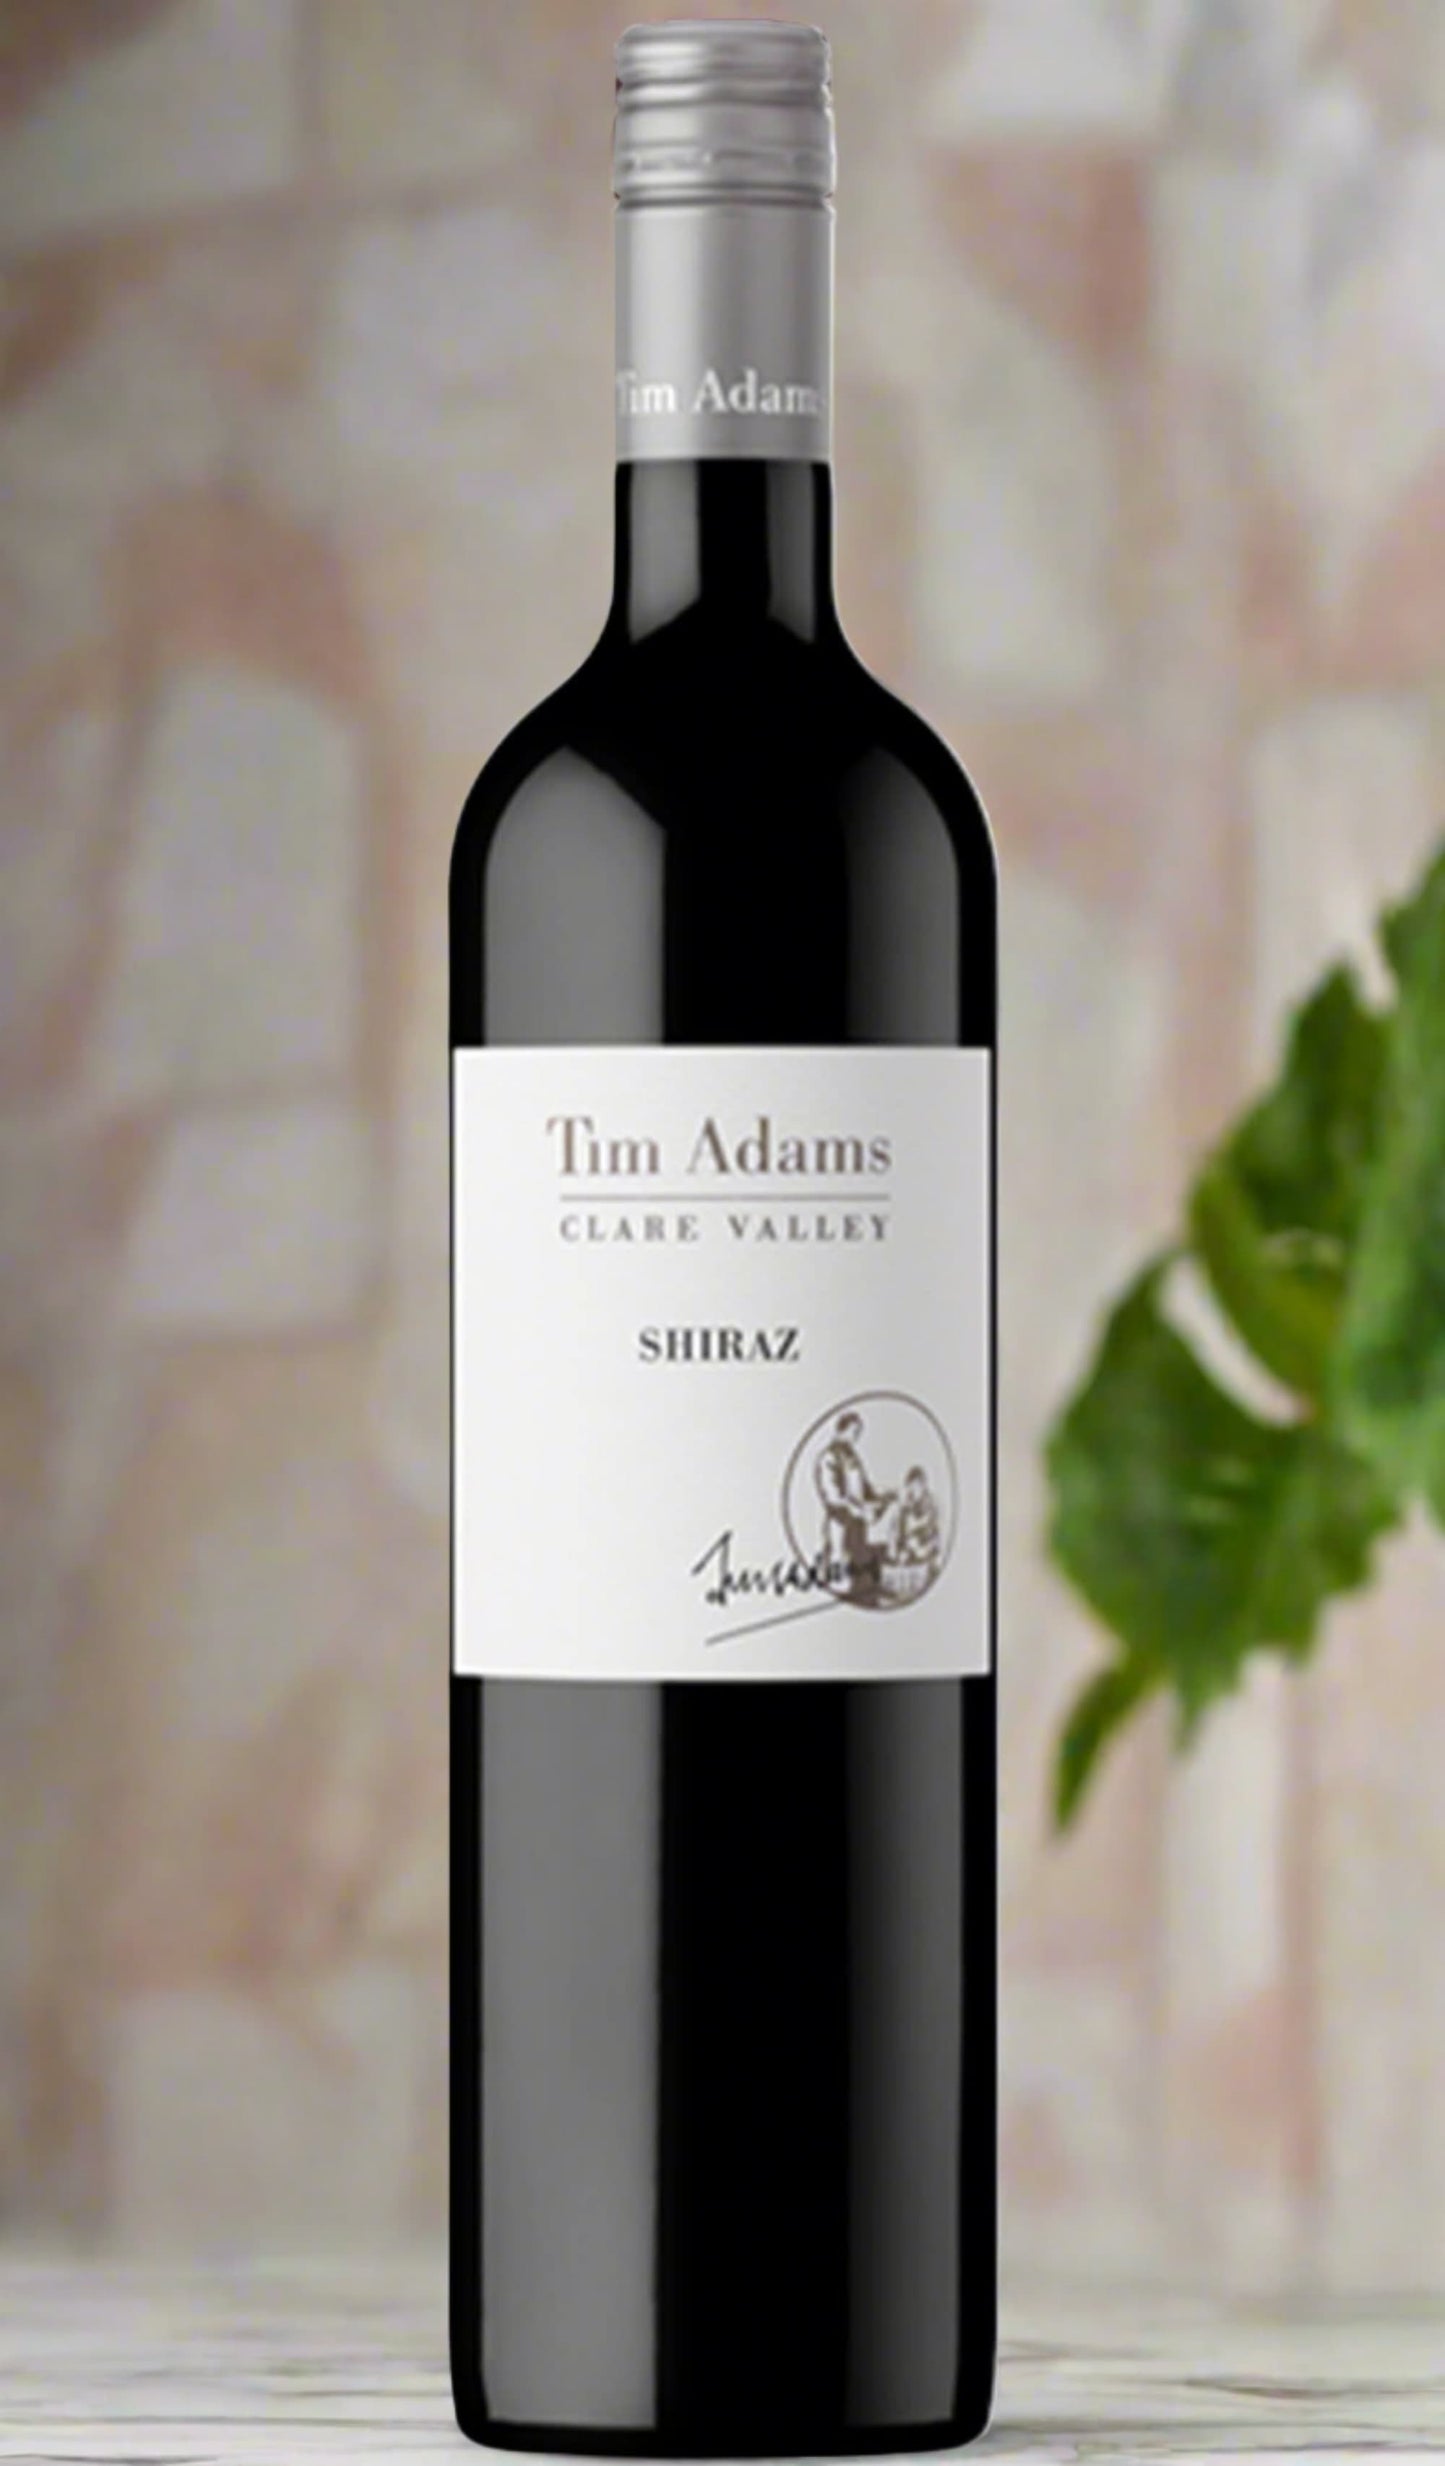 Find out more or purchase Tim Adams Shiraz 2021 (Clare Valley) online at Wine Sellers Direct - Australia's independent liquor specialists.